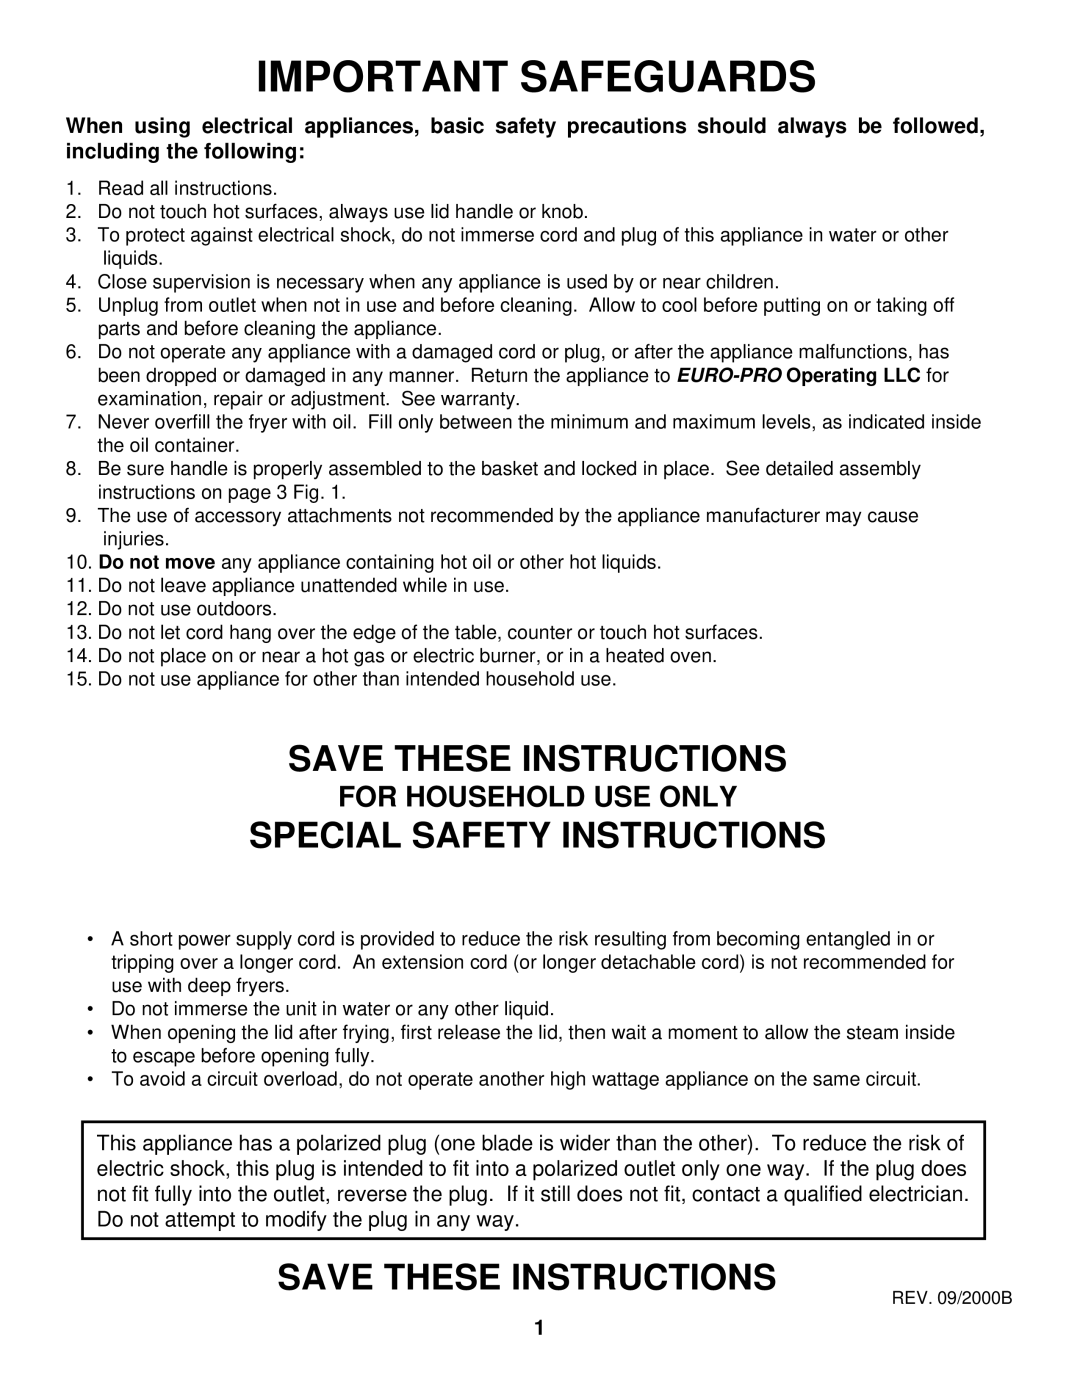 Bravetti EP64 manual Important Safeguards, For Household Use Only, Save These Instructions, Special Safety Instructions 